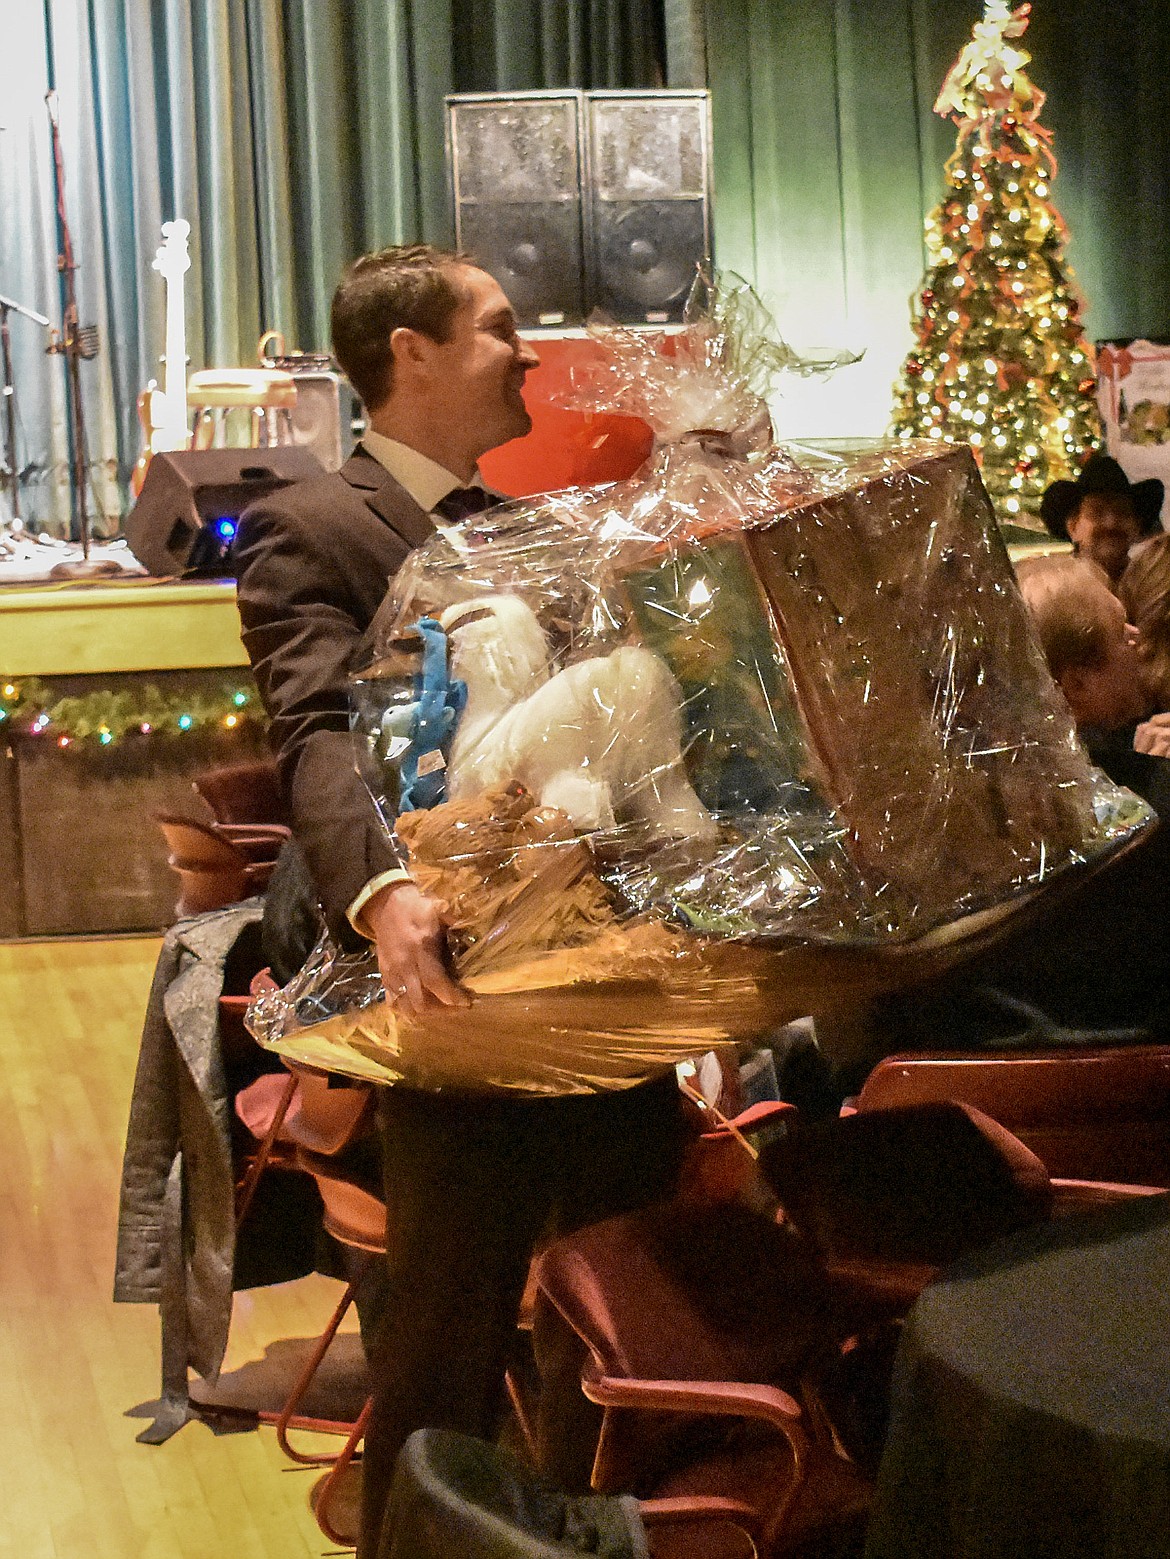 Cabinet Peaks Medical Center Foundation board member Zach Sherbo lugs one of the raffle prizes &#151; a collection of items for a small child &#151; to the lucky winner during the annual Festival of Trees Fundraising Gala for the Cabinet Peaks Medical Center Foundation. (Ben Kibbey/The Western News)